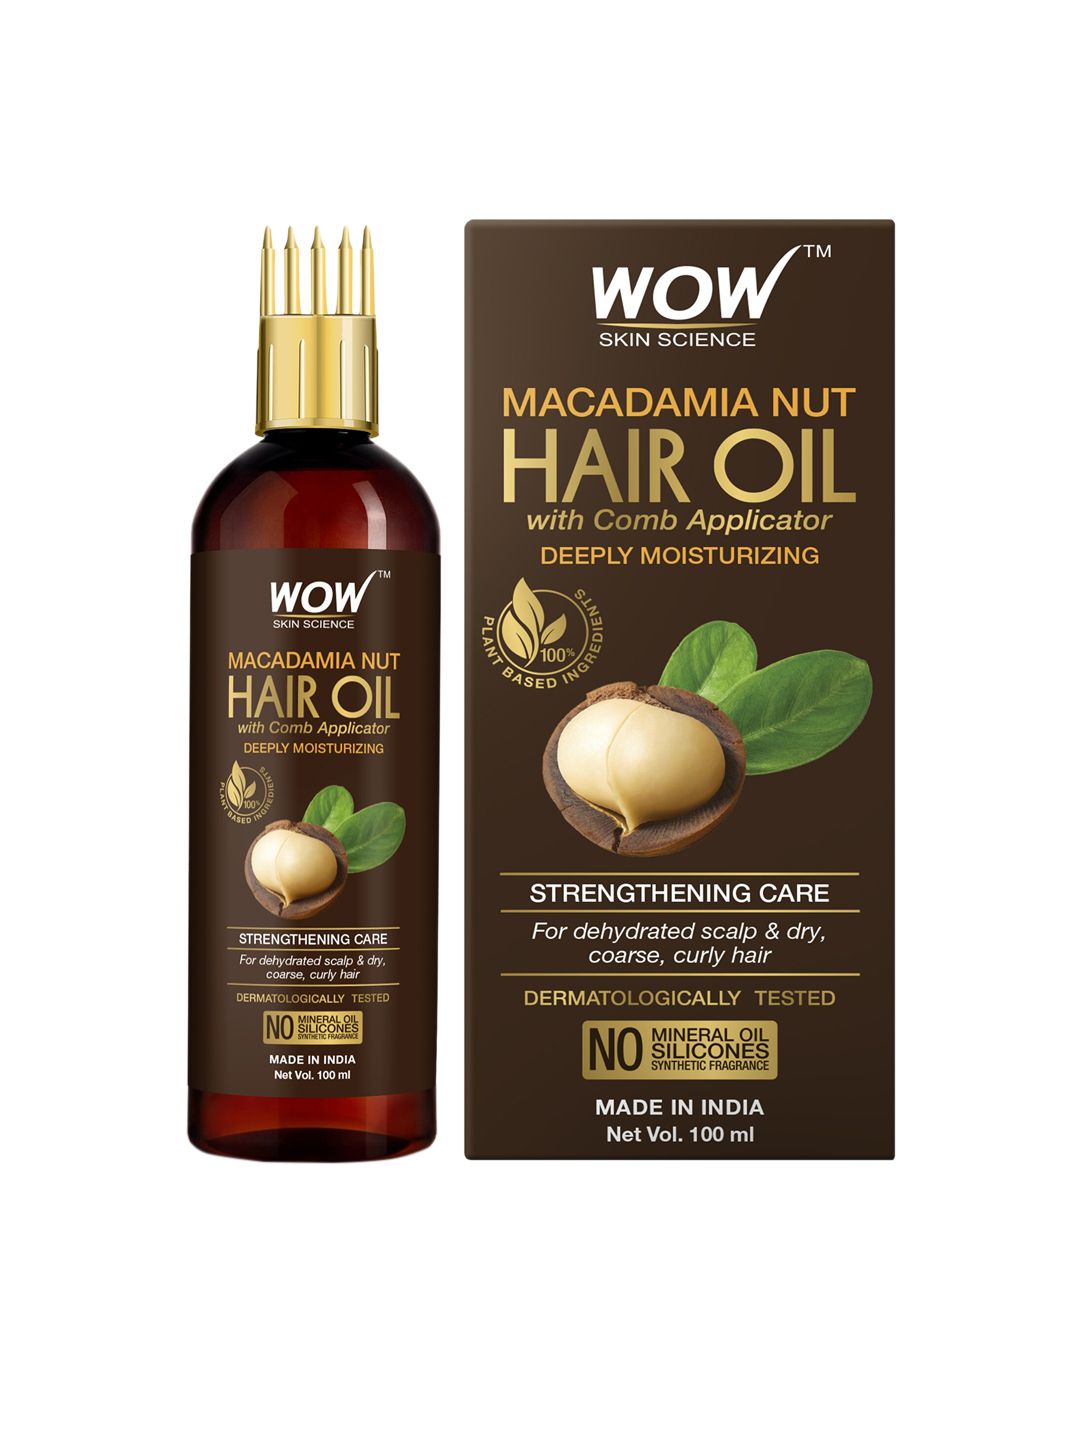 WOW SKIN SCIENCE Strengthening Care Macadamia Nut Hair Oil with Comb Applicator - 100 ml Price in India